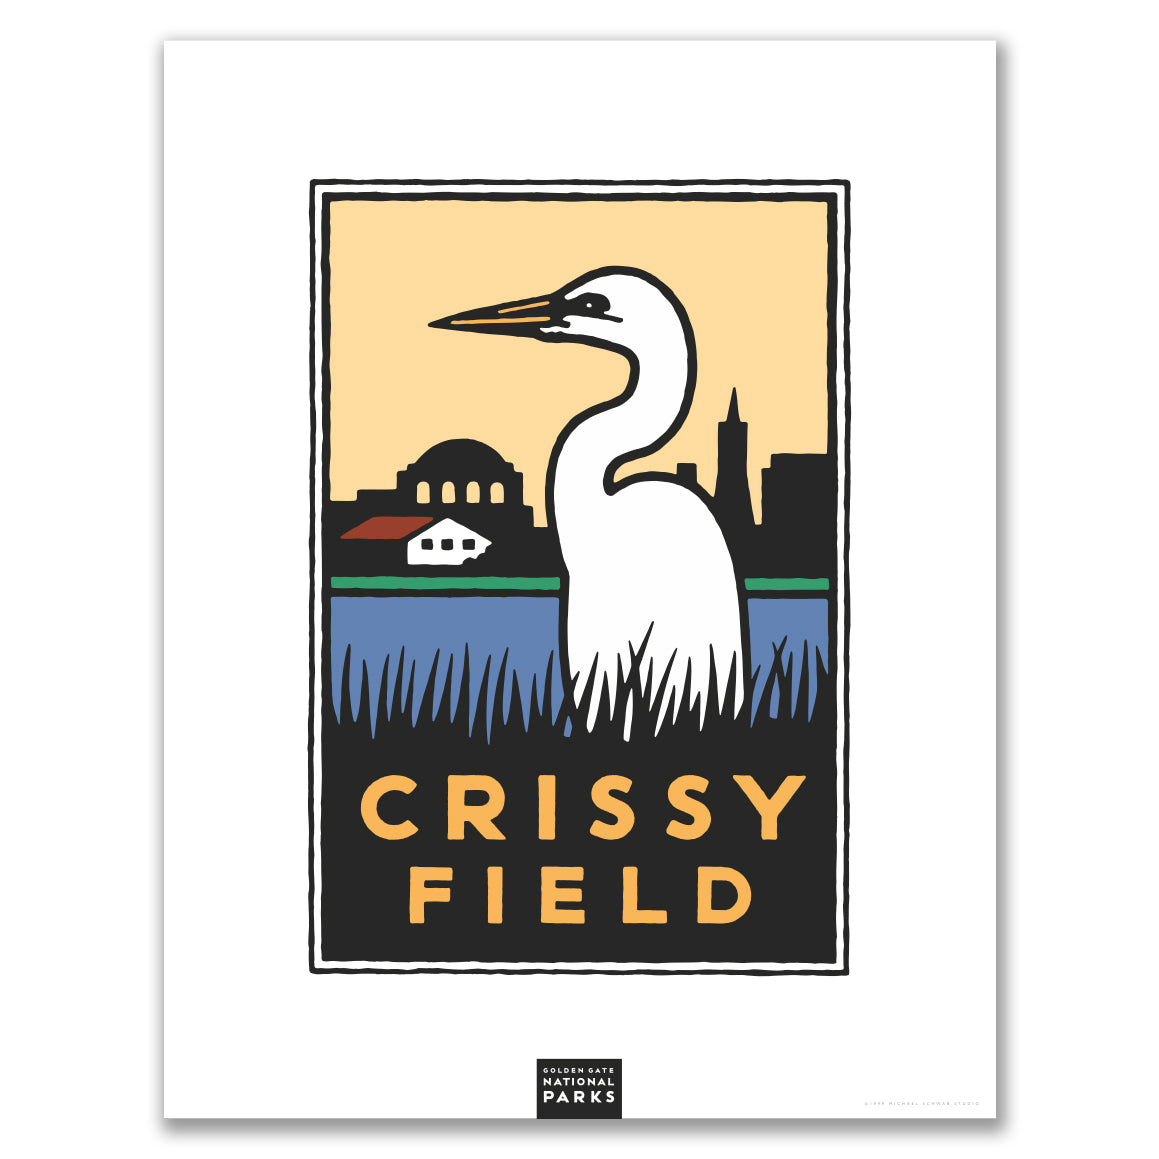 Multicolor Crissy Field giclee poster print, with art by Michael Schwab